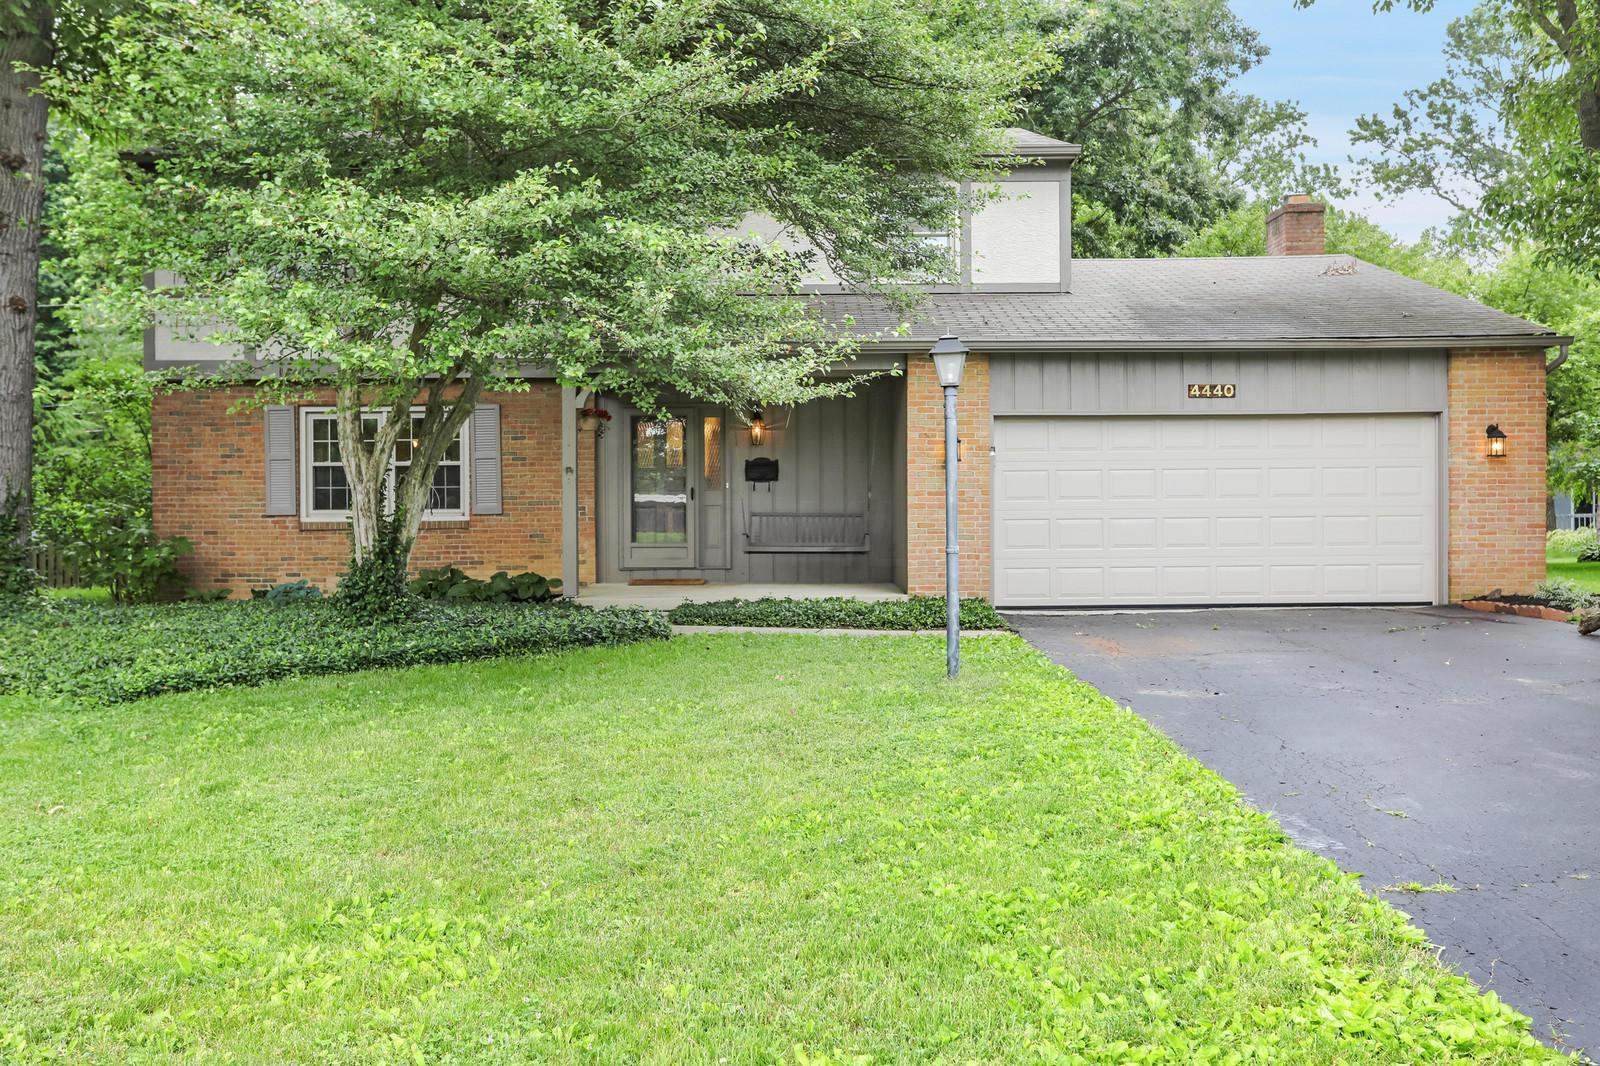 4440 Carriage Hill Lane, Columbus, OH 43220